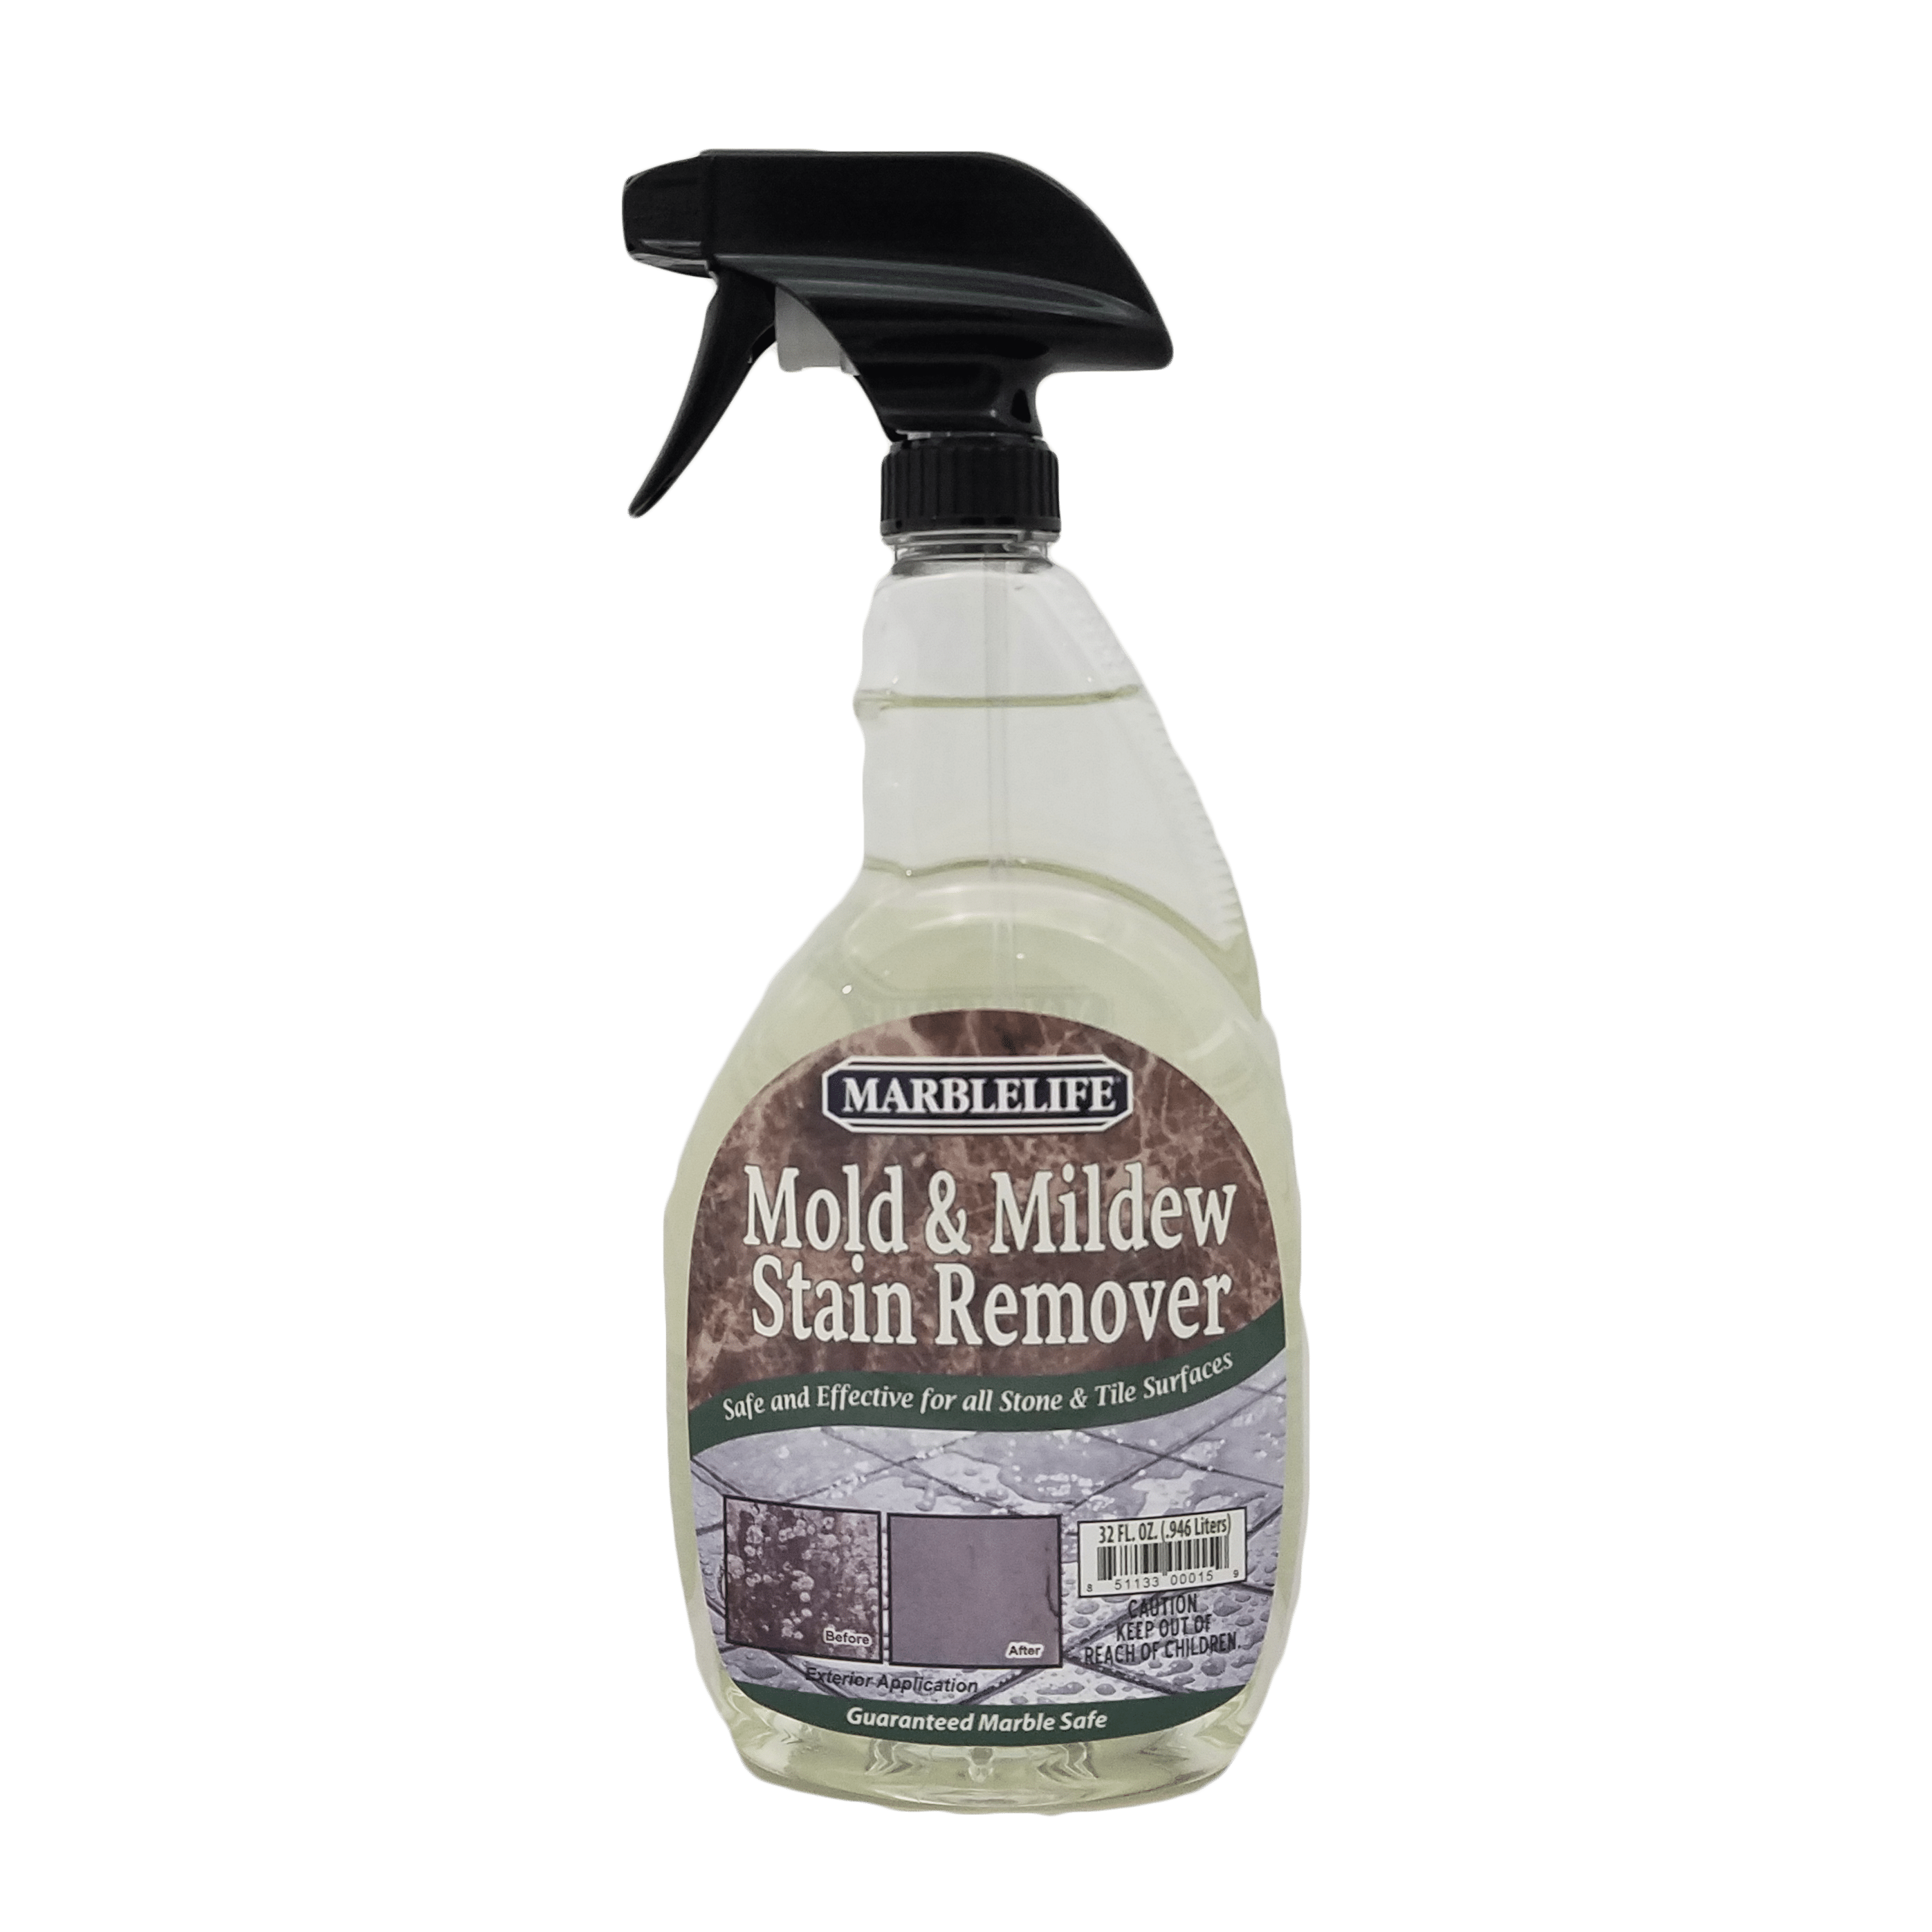 Mold and Mildew Stain Remover for Tile ShowersMarblelife Products